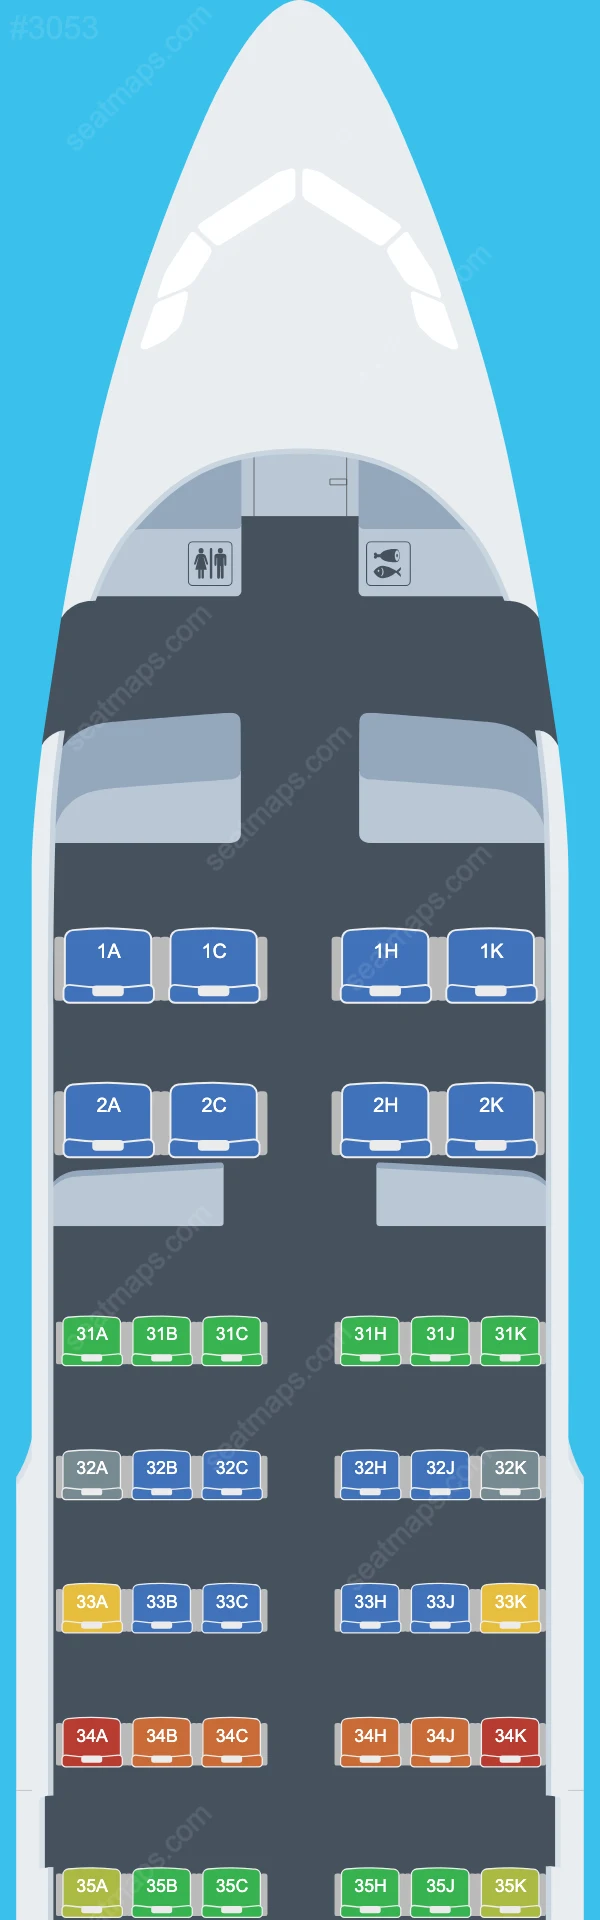 China Southern Airbus A319 Seat Maps A319-100 V.2